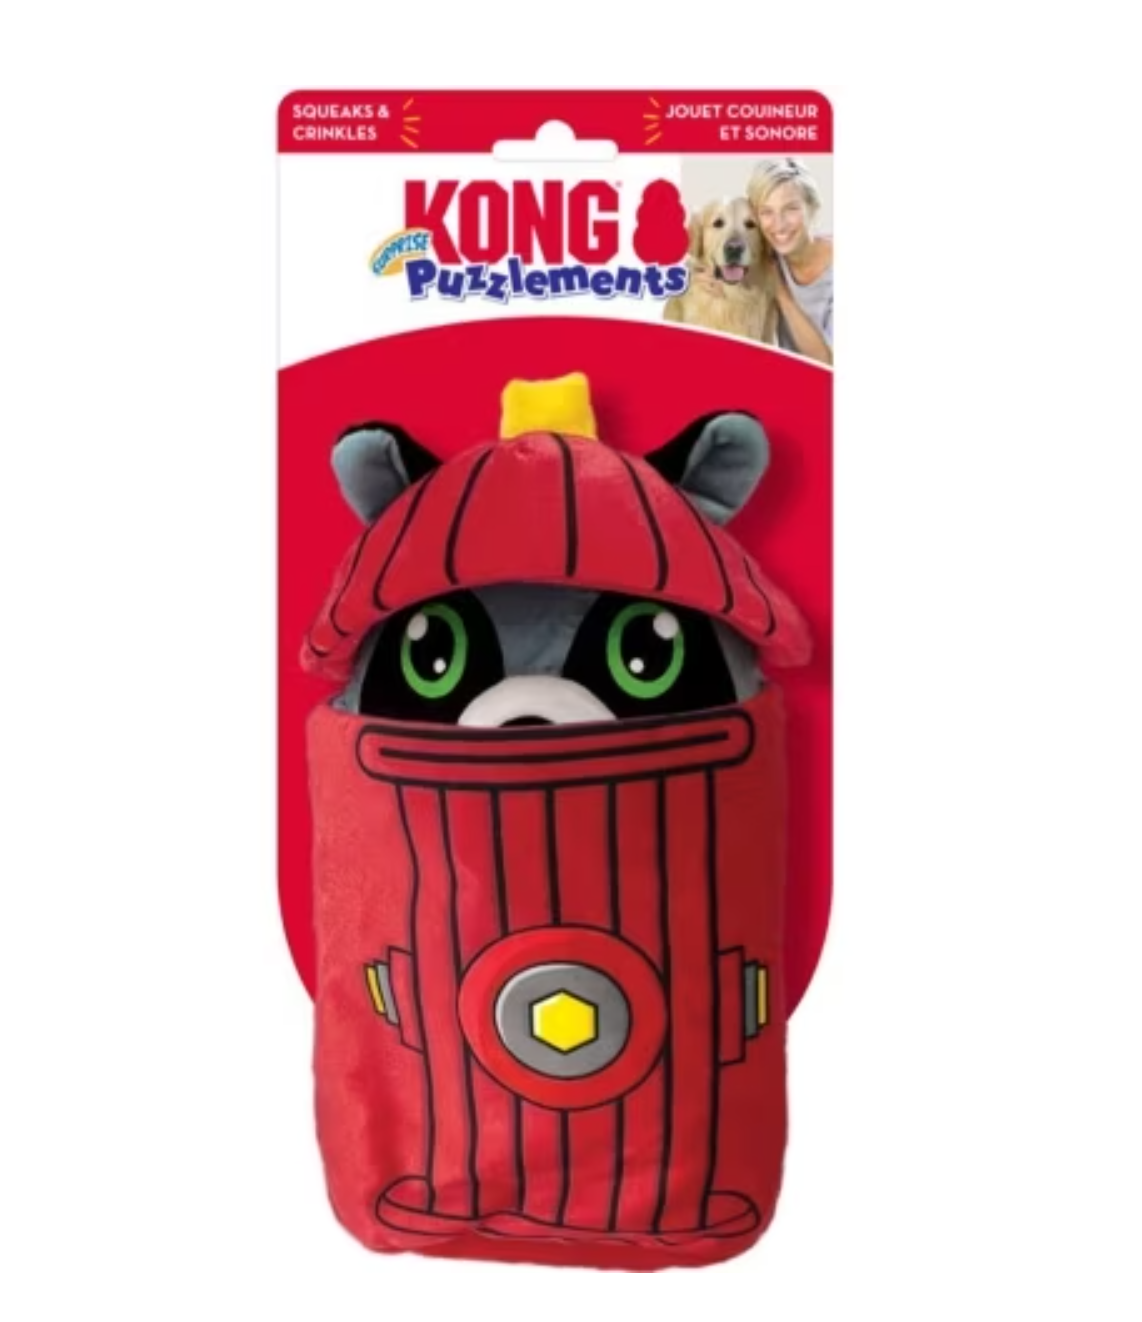 Kong Puzzlements Fire Hydrant Dog Toy